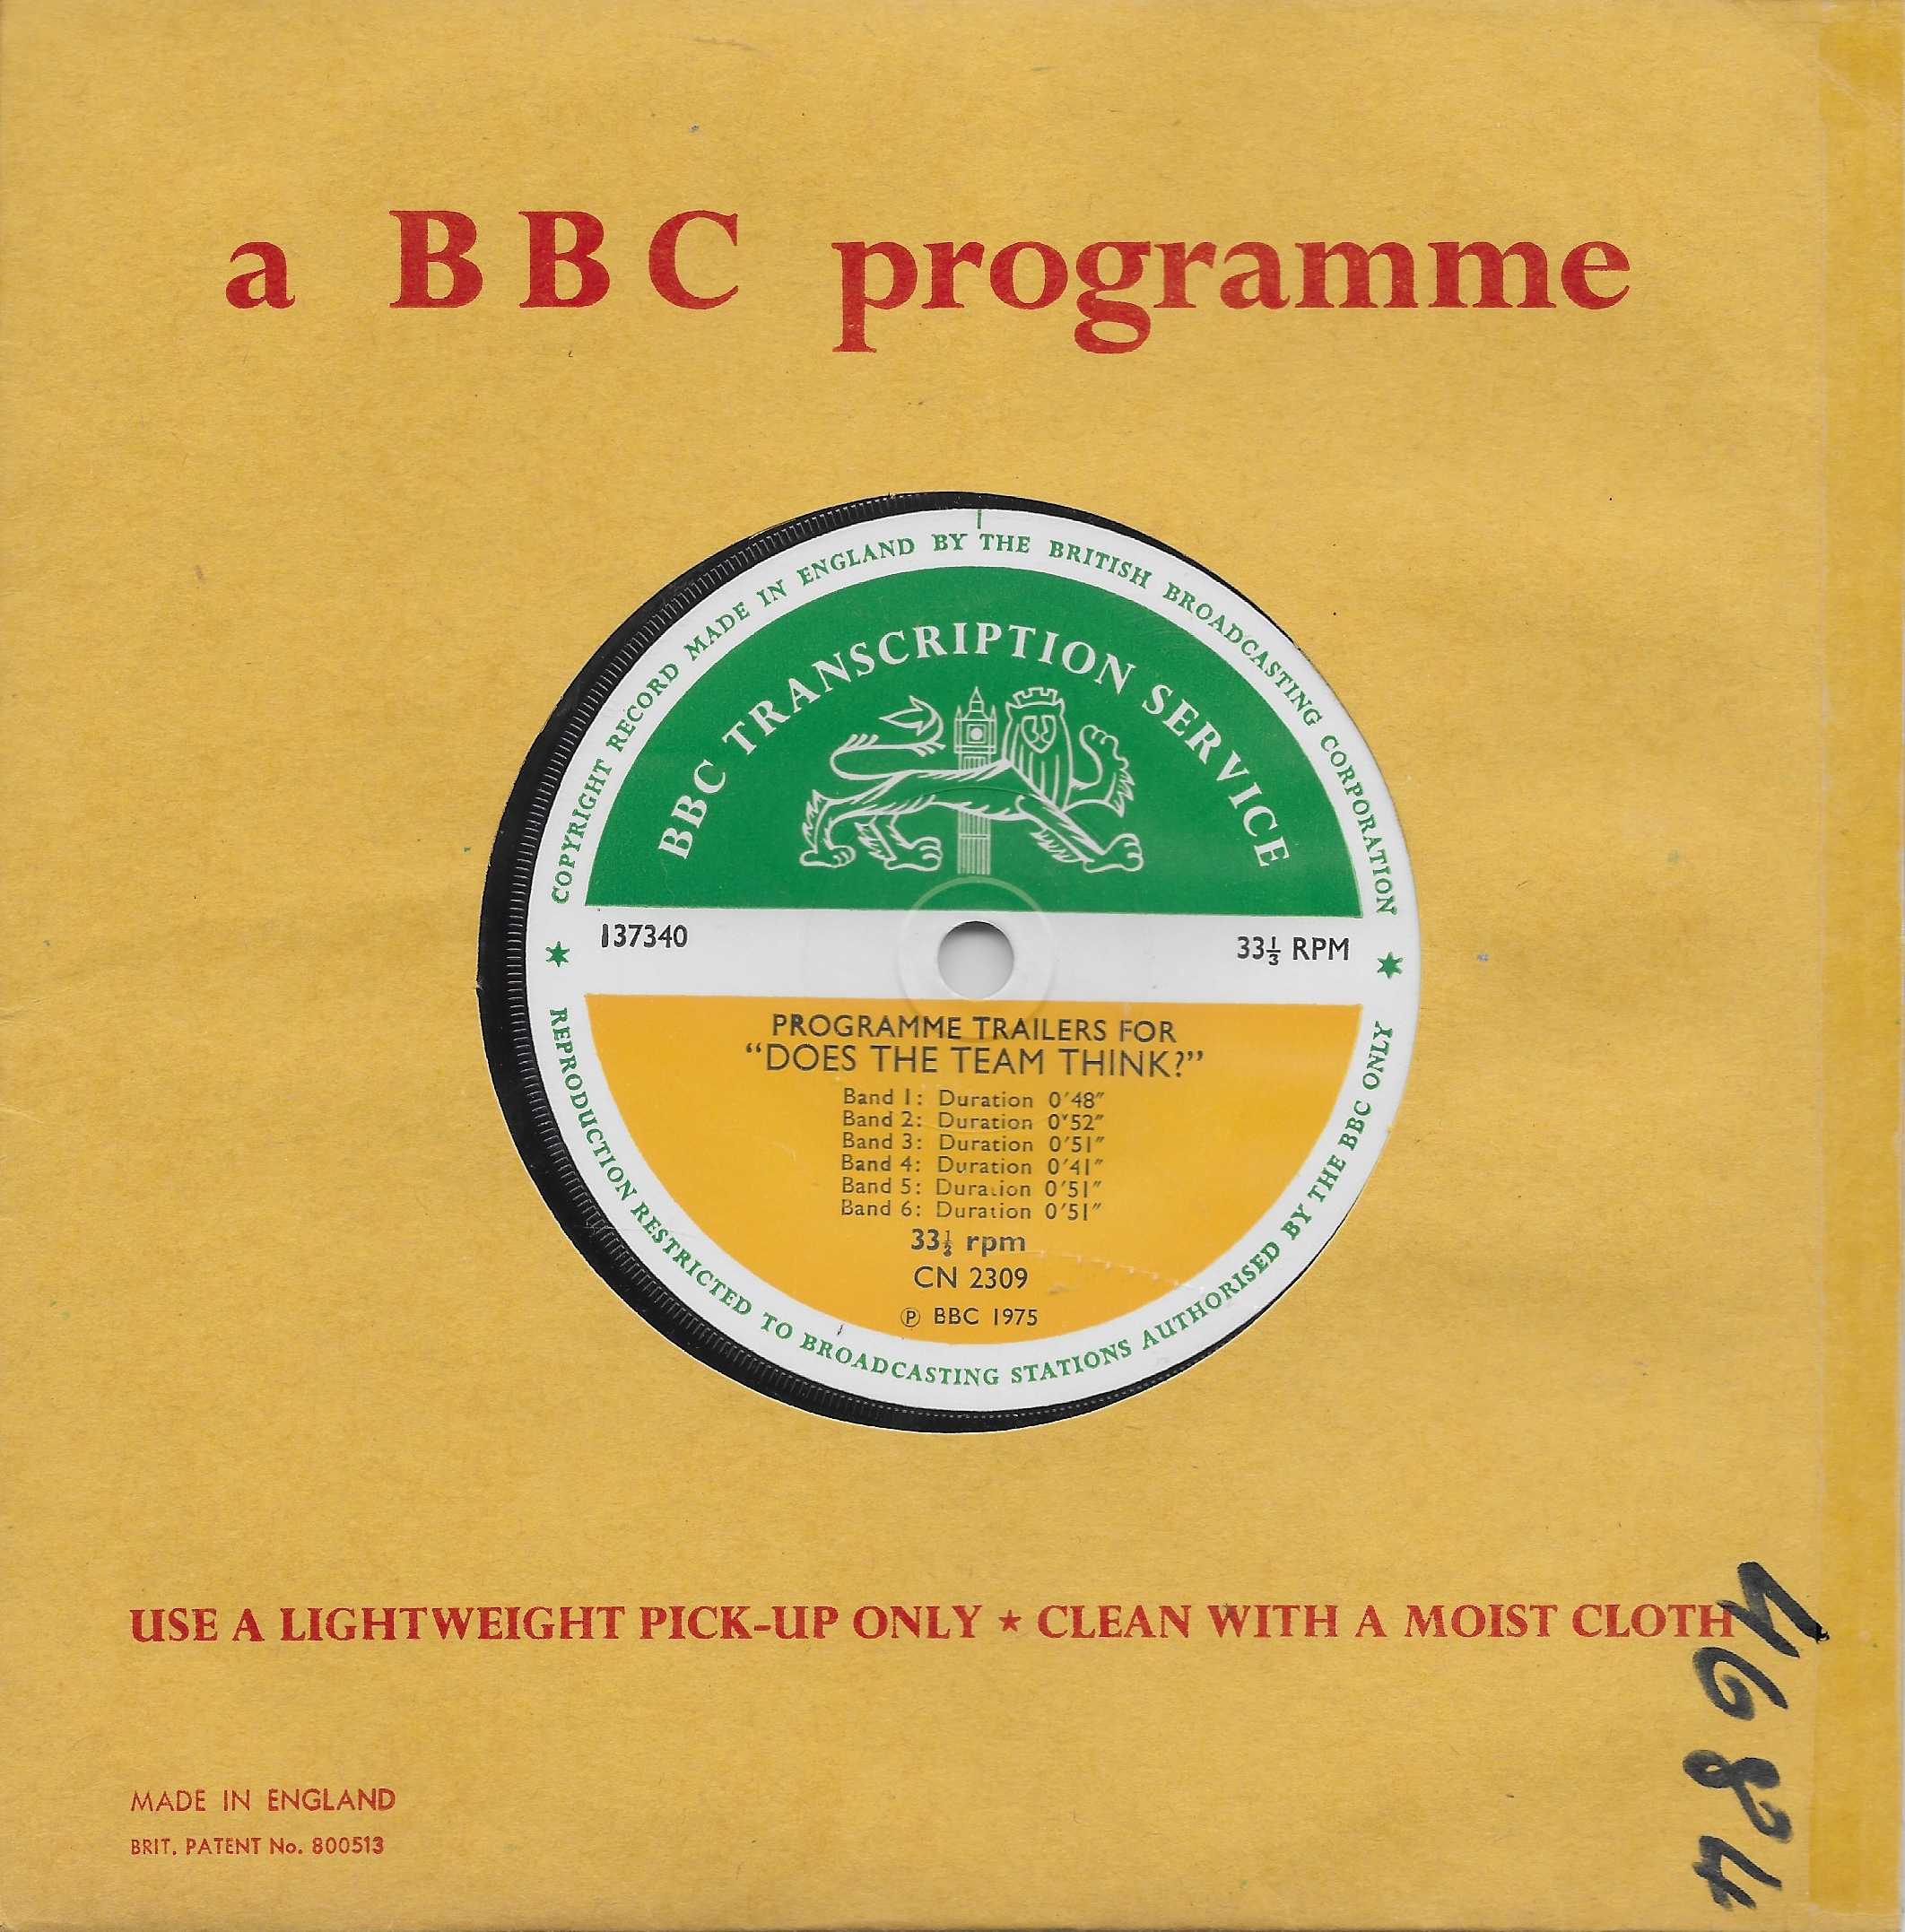 Picture of Programme trailers for "Does the team think?" by artist  from the BBC singles - Records and Tapes library